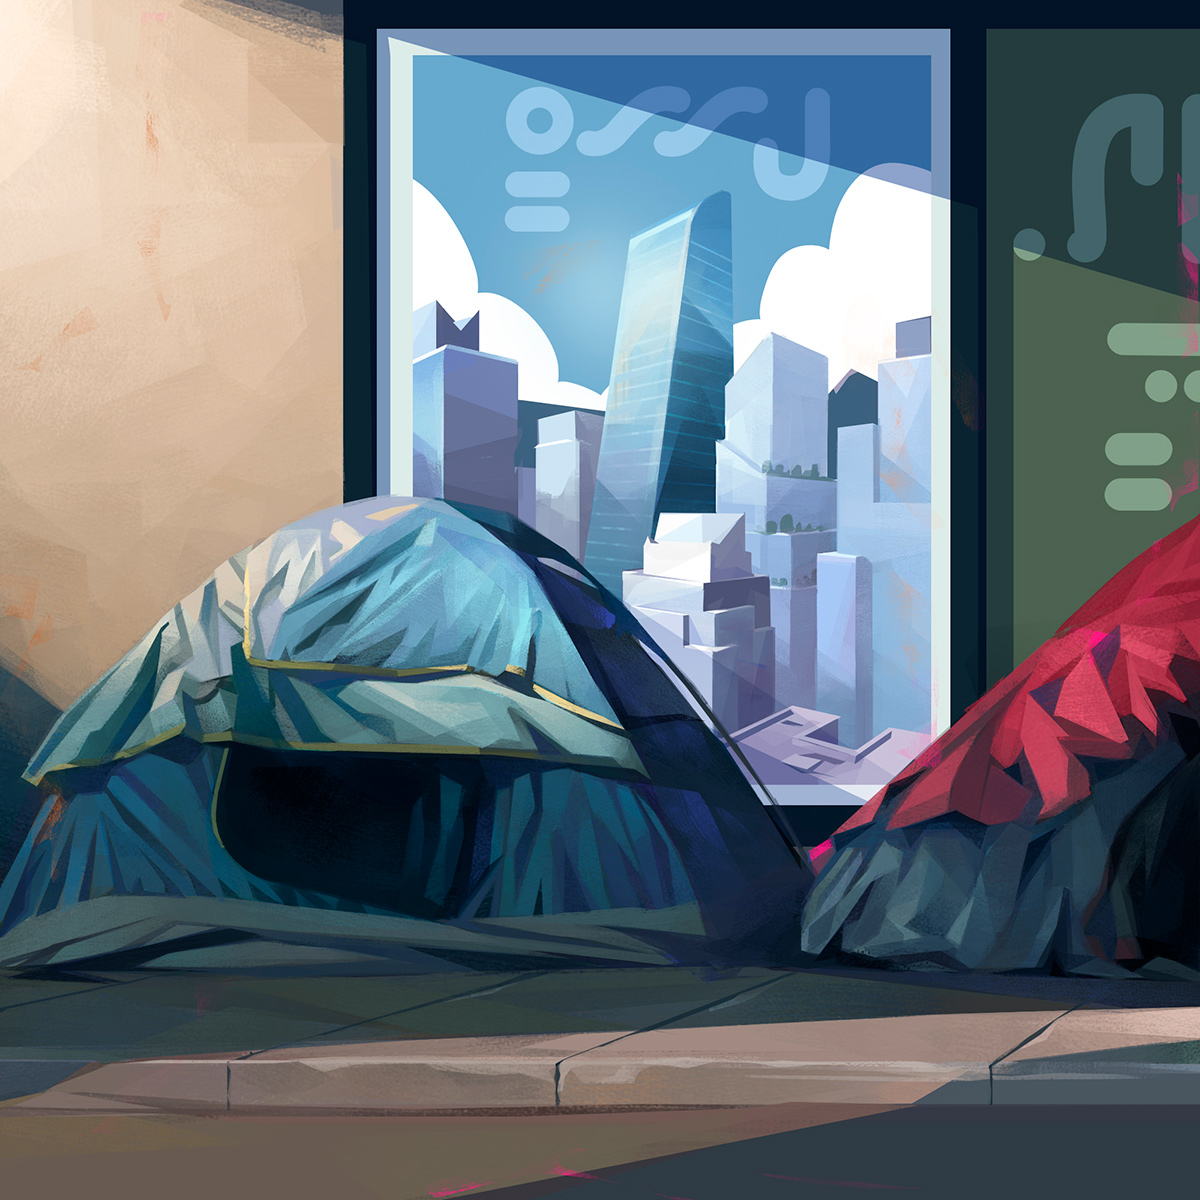 Illustration of tents on a sidewalk in front of a advertisement for tall glass condos.